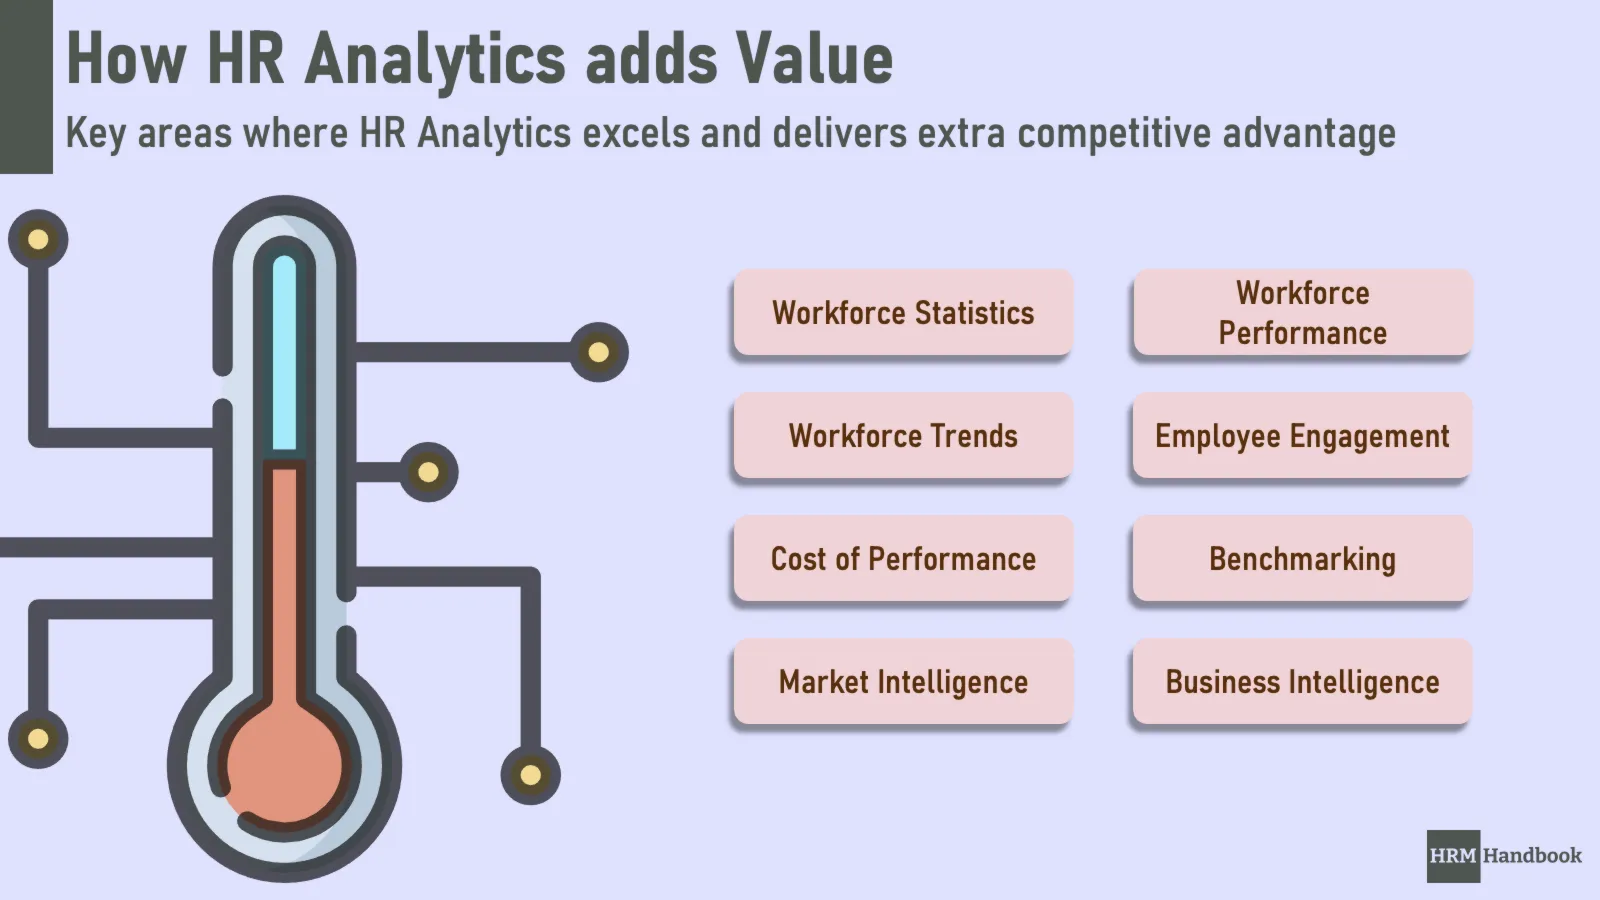 How HR Analytics delivers extra value added, in what areas it can excel and improve overall competitive position of an organization